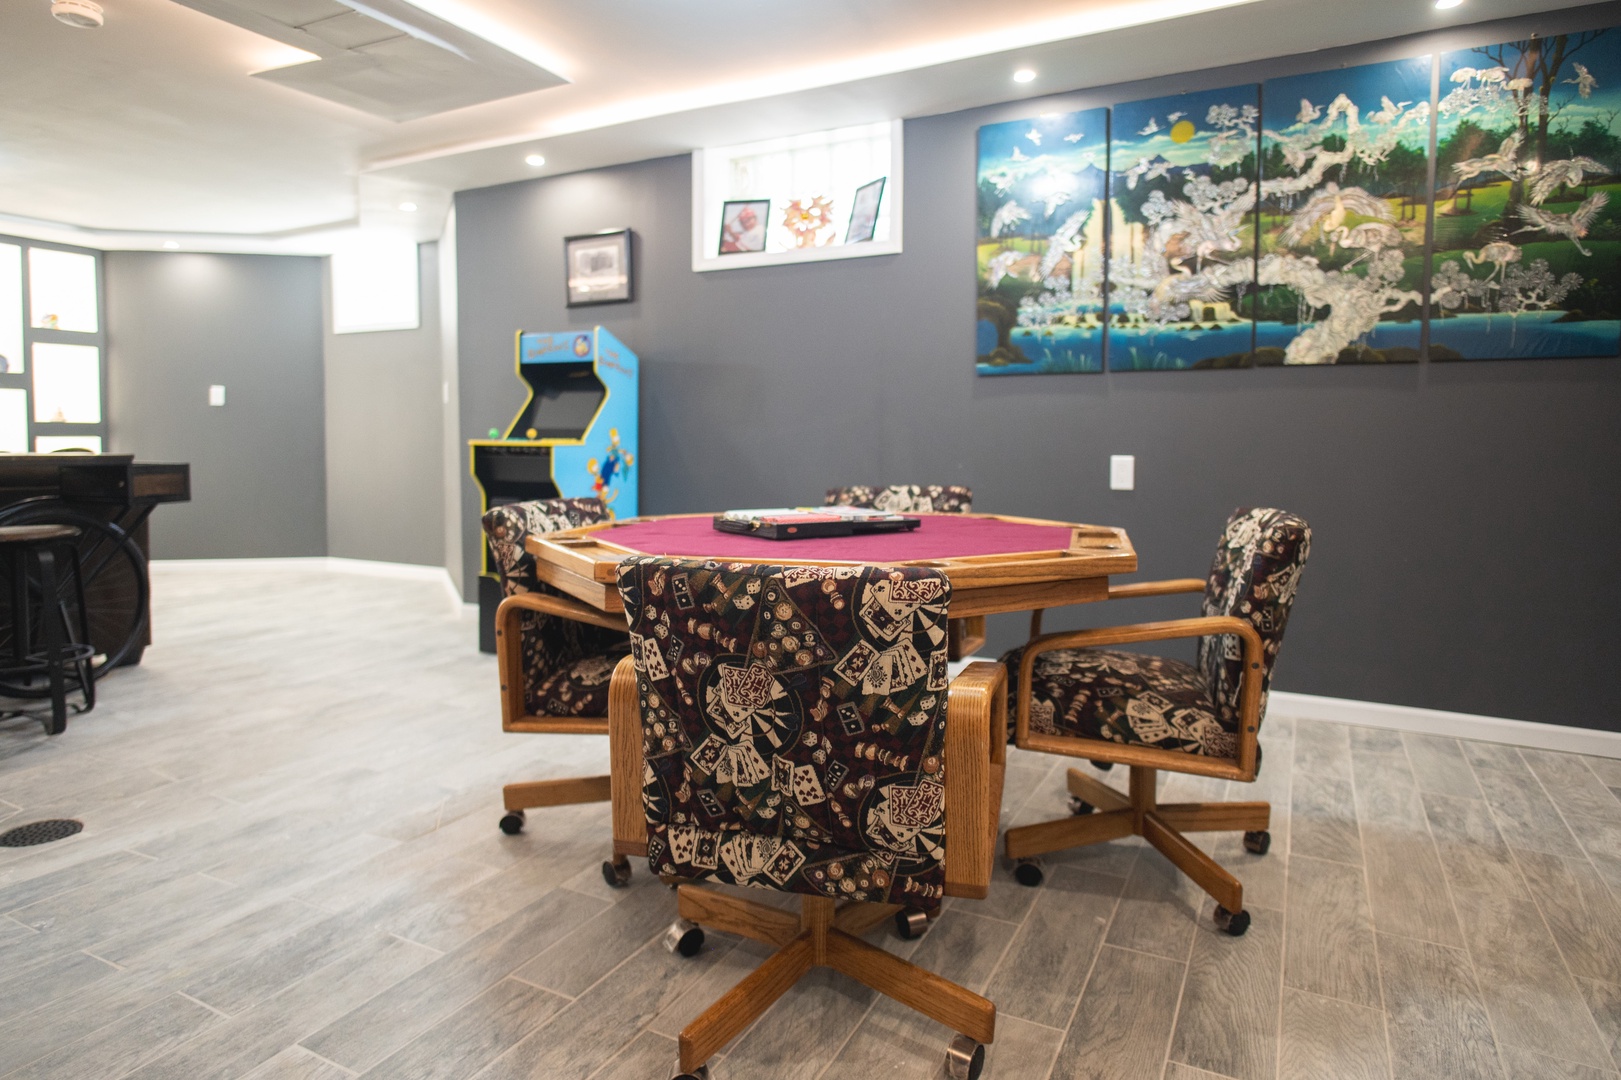 Feeling competitive? The basement game room is the perfect hangout spot